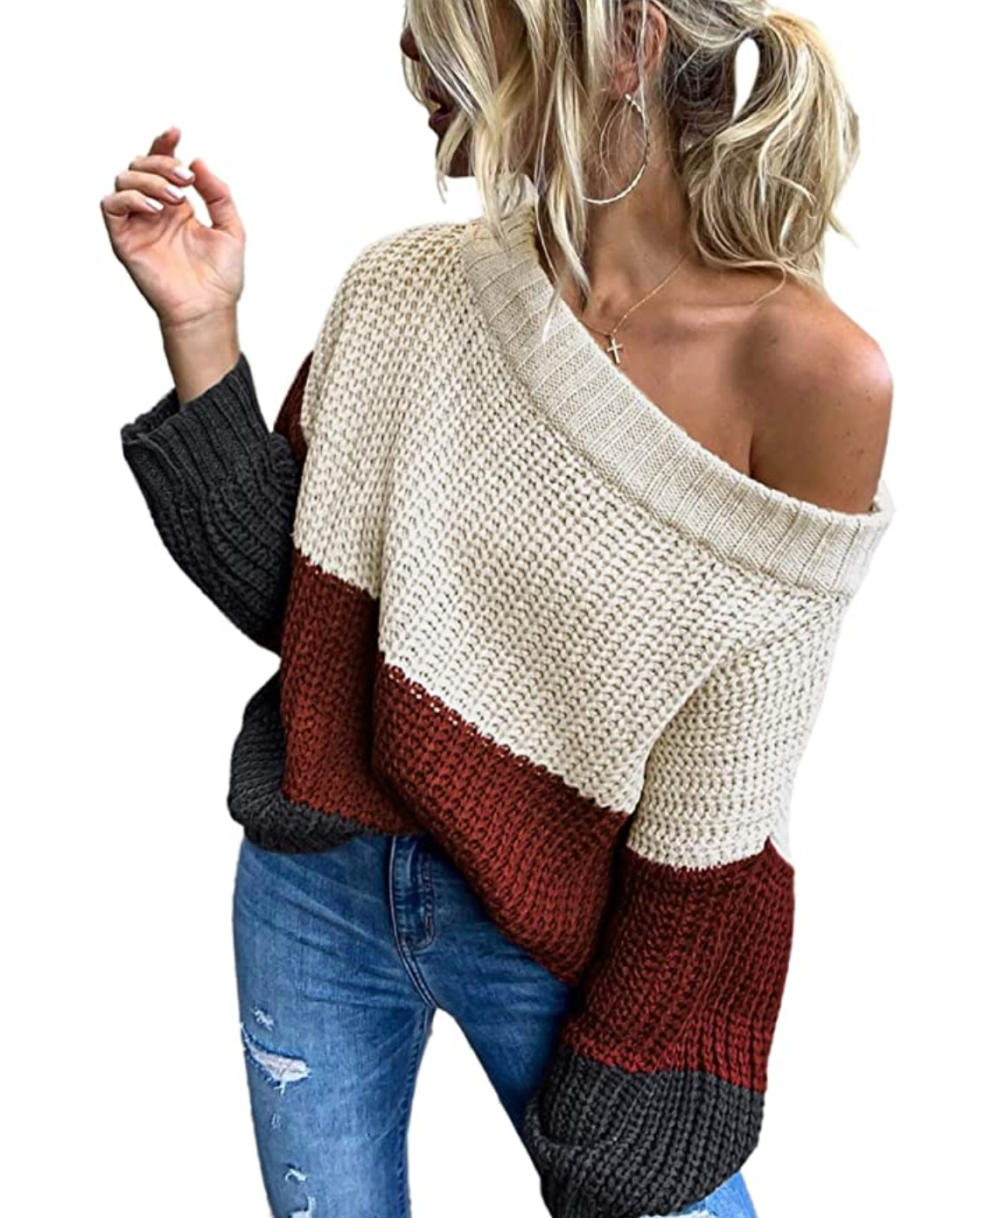 Angashion Knit Sweater Is Getting Shoppers Tons of Compliments | Us Weekly